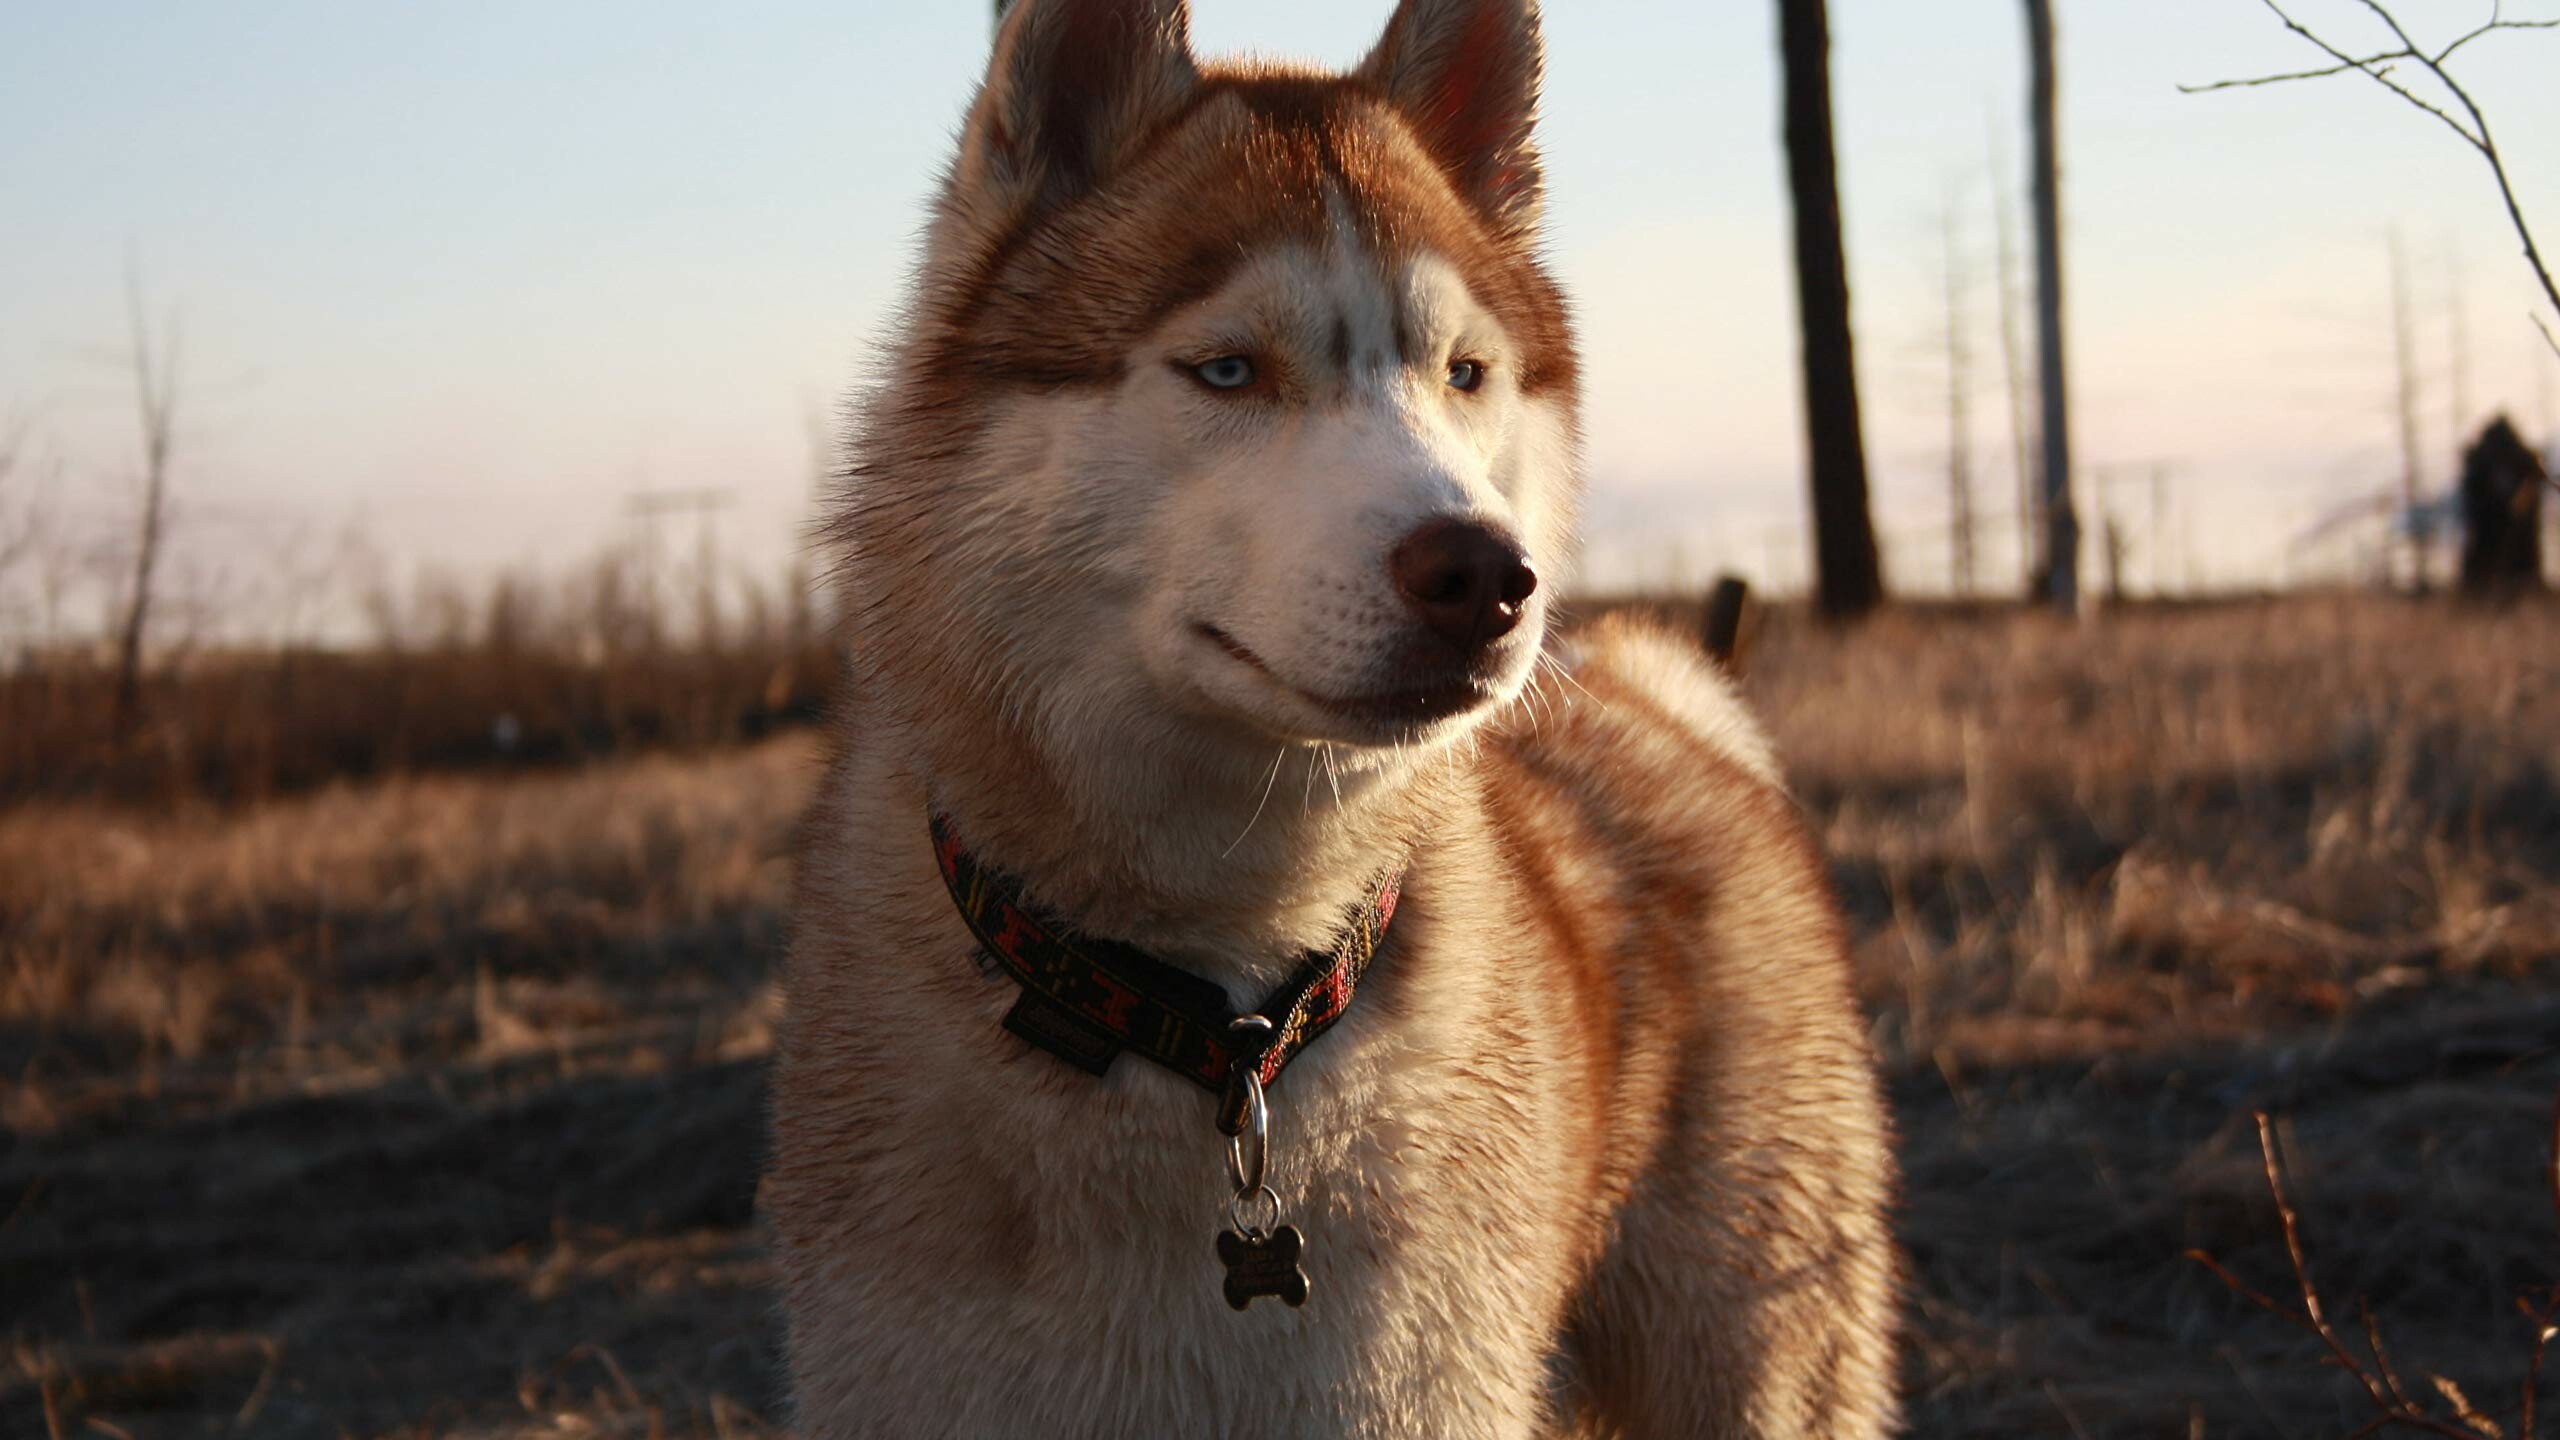 Siberian Husky: The breed typically have no aggression towards humans. 2560x1440 HD Background.